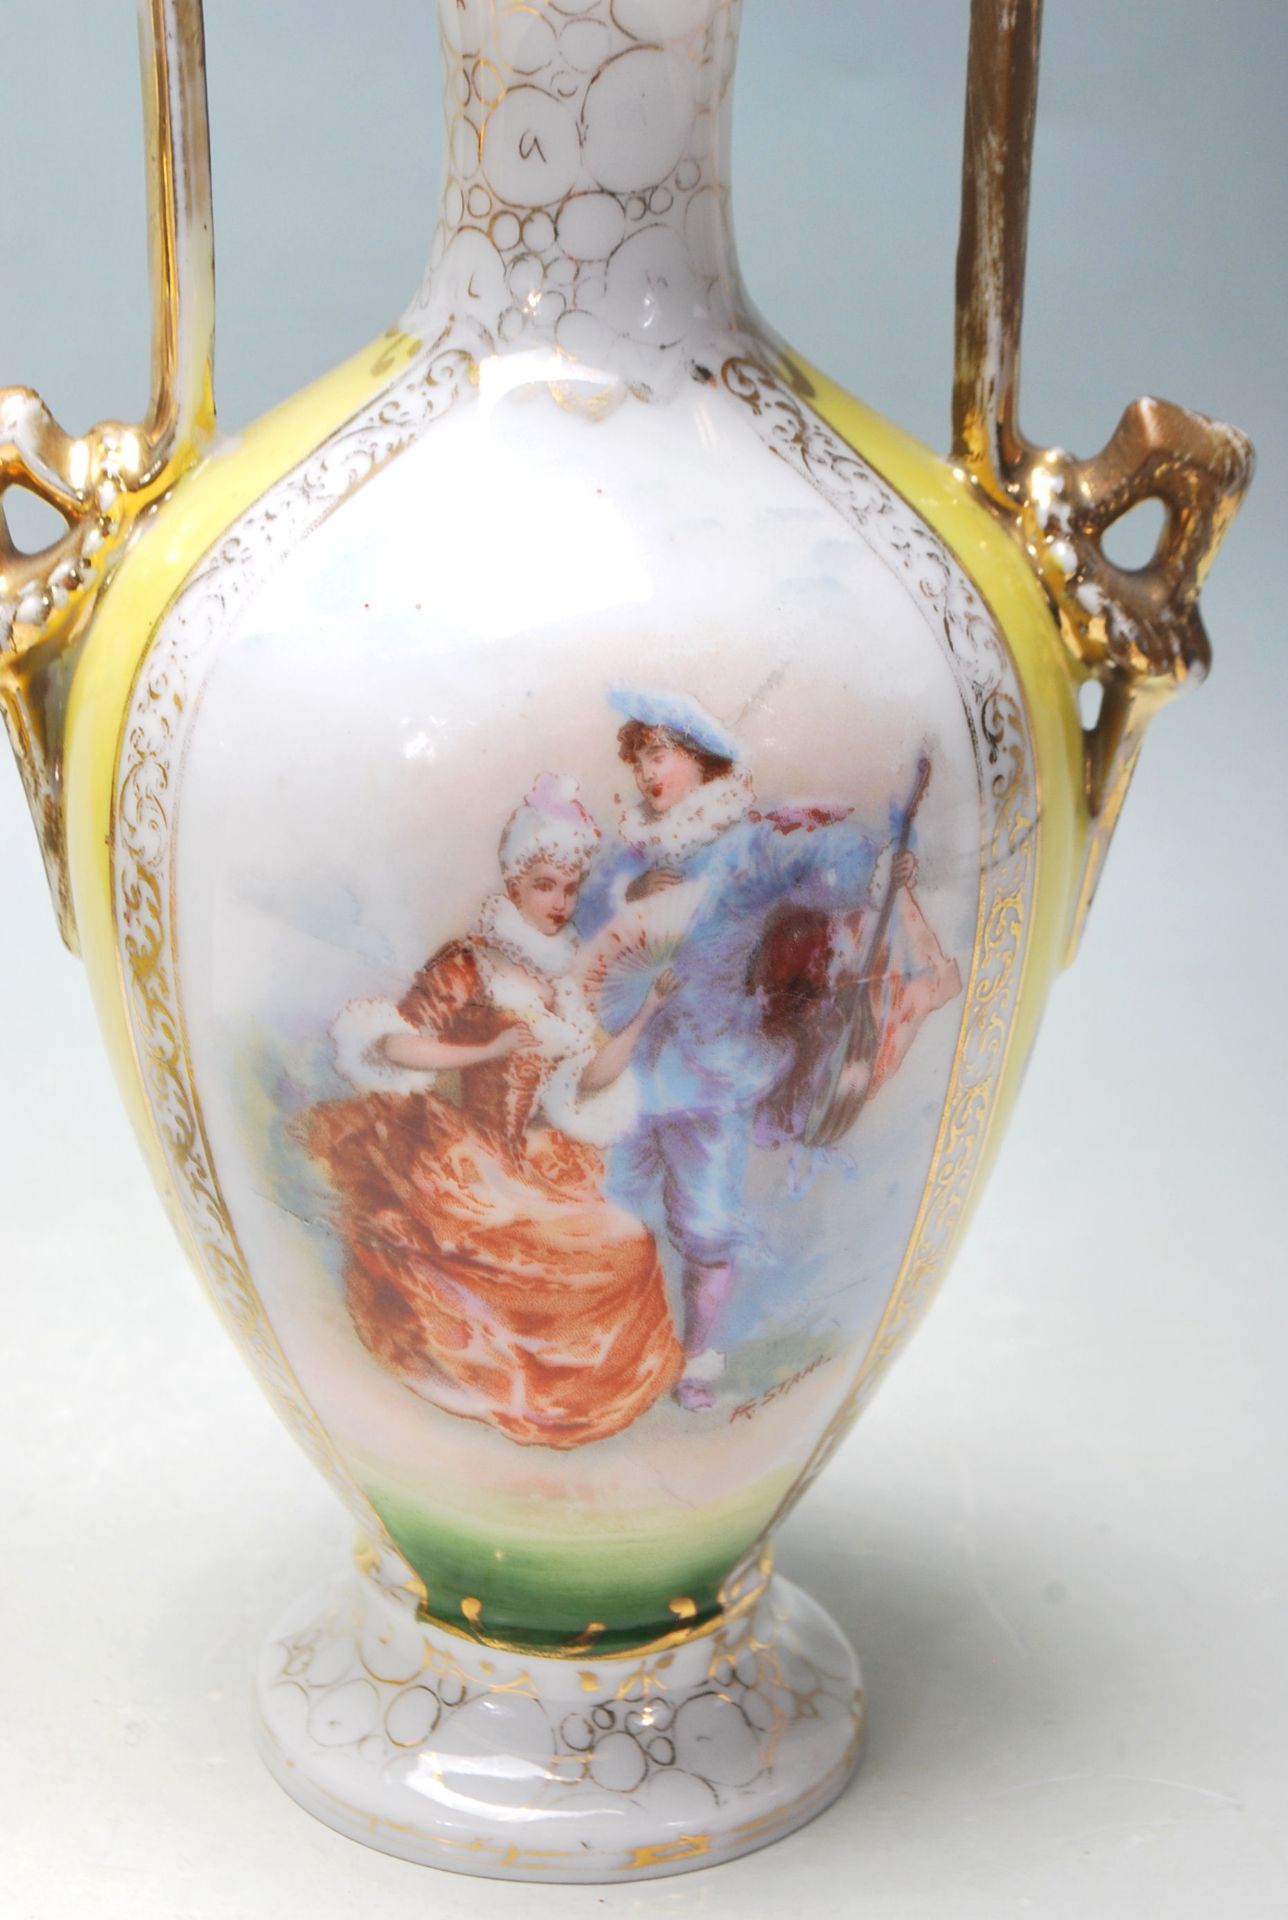 A PAIR OF GERMAN VASES BY VON SCHIERHOLZ 1900C - C.G. SCHIERHOLZ & SON - PAITED BY FR STAHL - Image 3 of 11